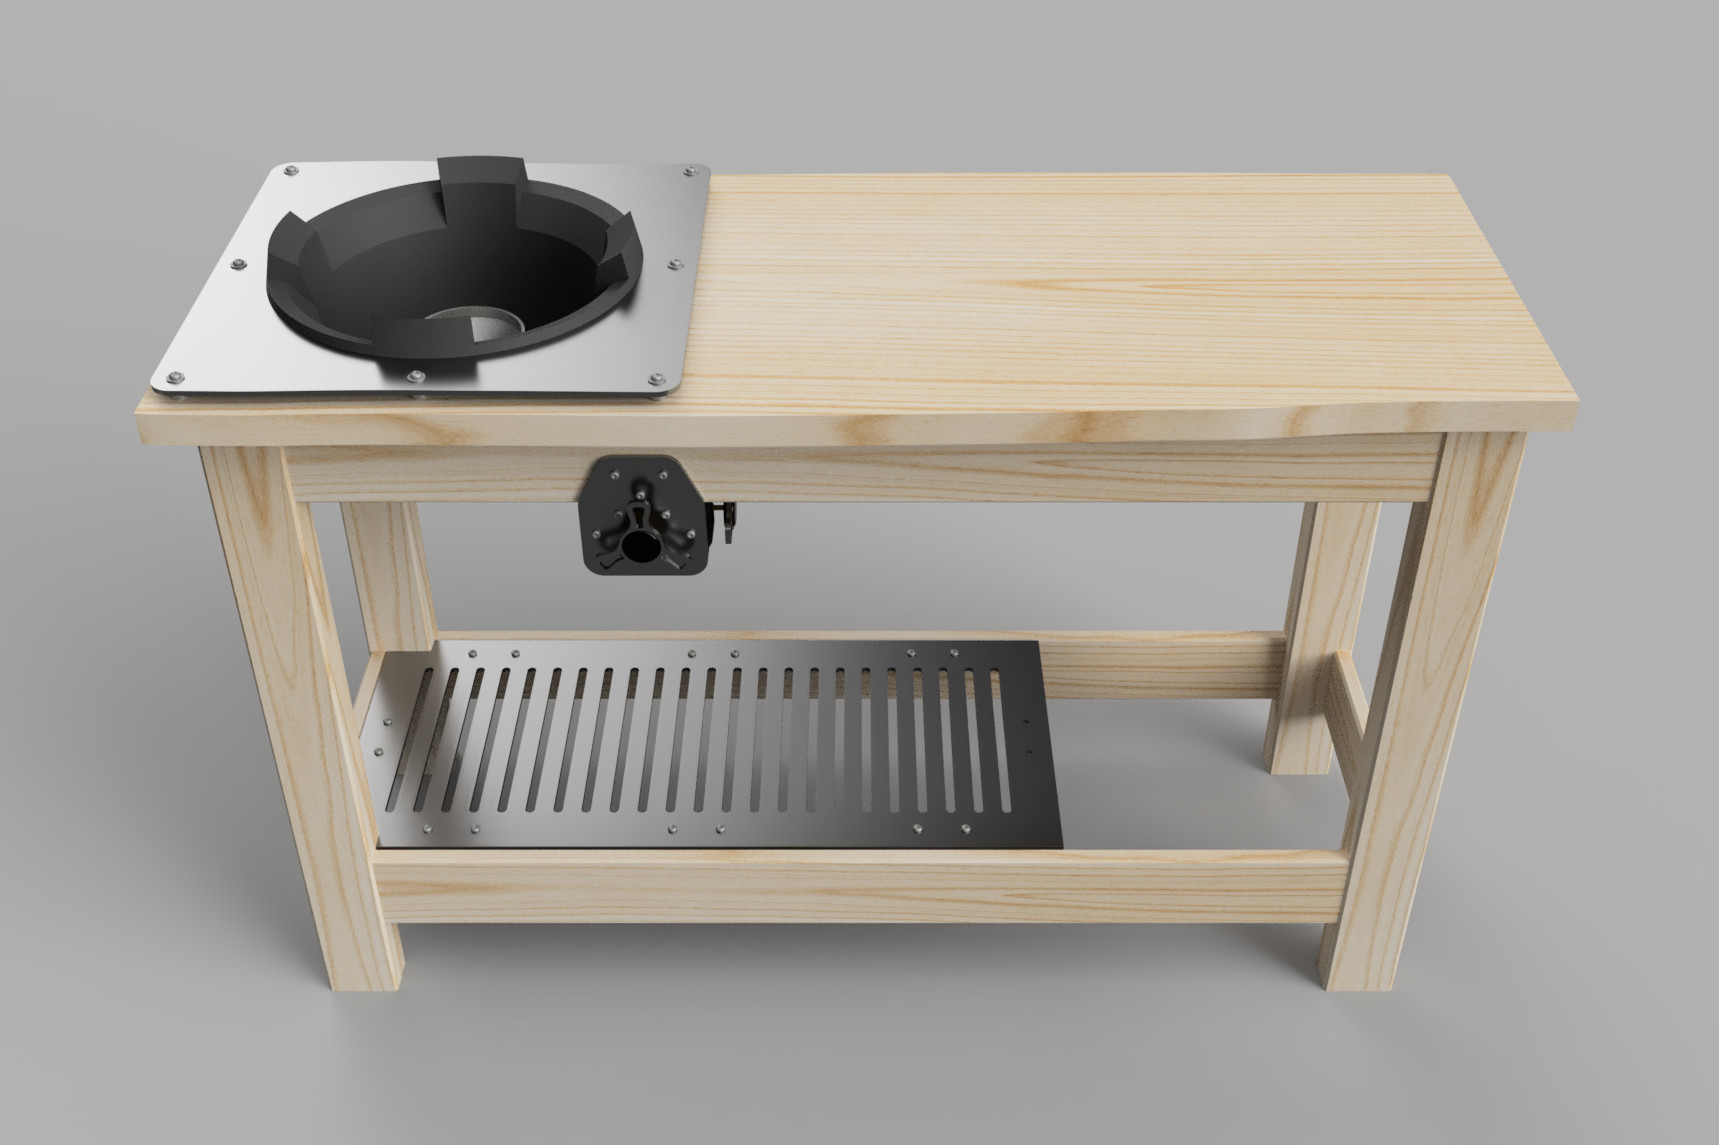 A rendered image of the cooking station. It is a pine bench with a wok burner mounted on in the benchtop on the left side, along with associated heat shield and gas valve block.